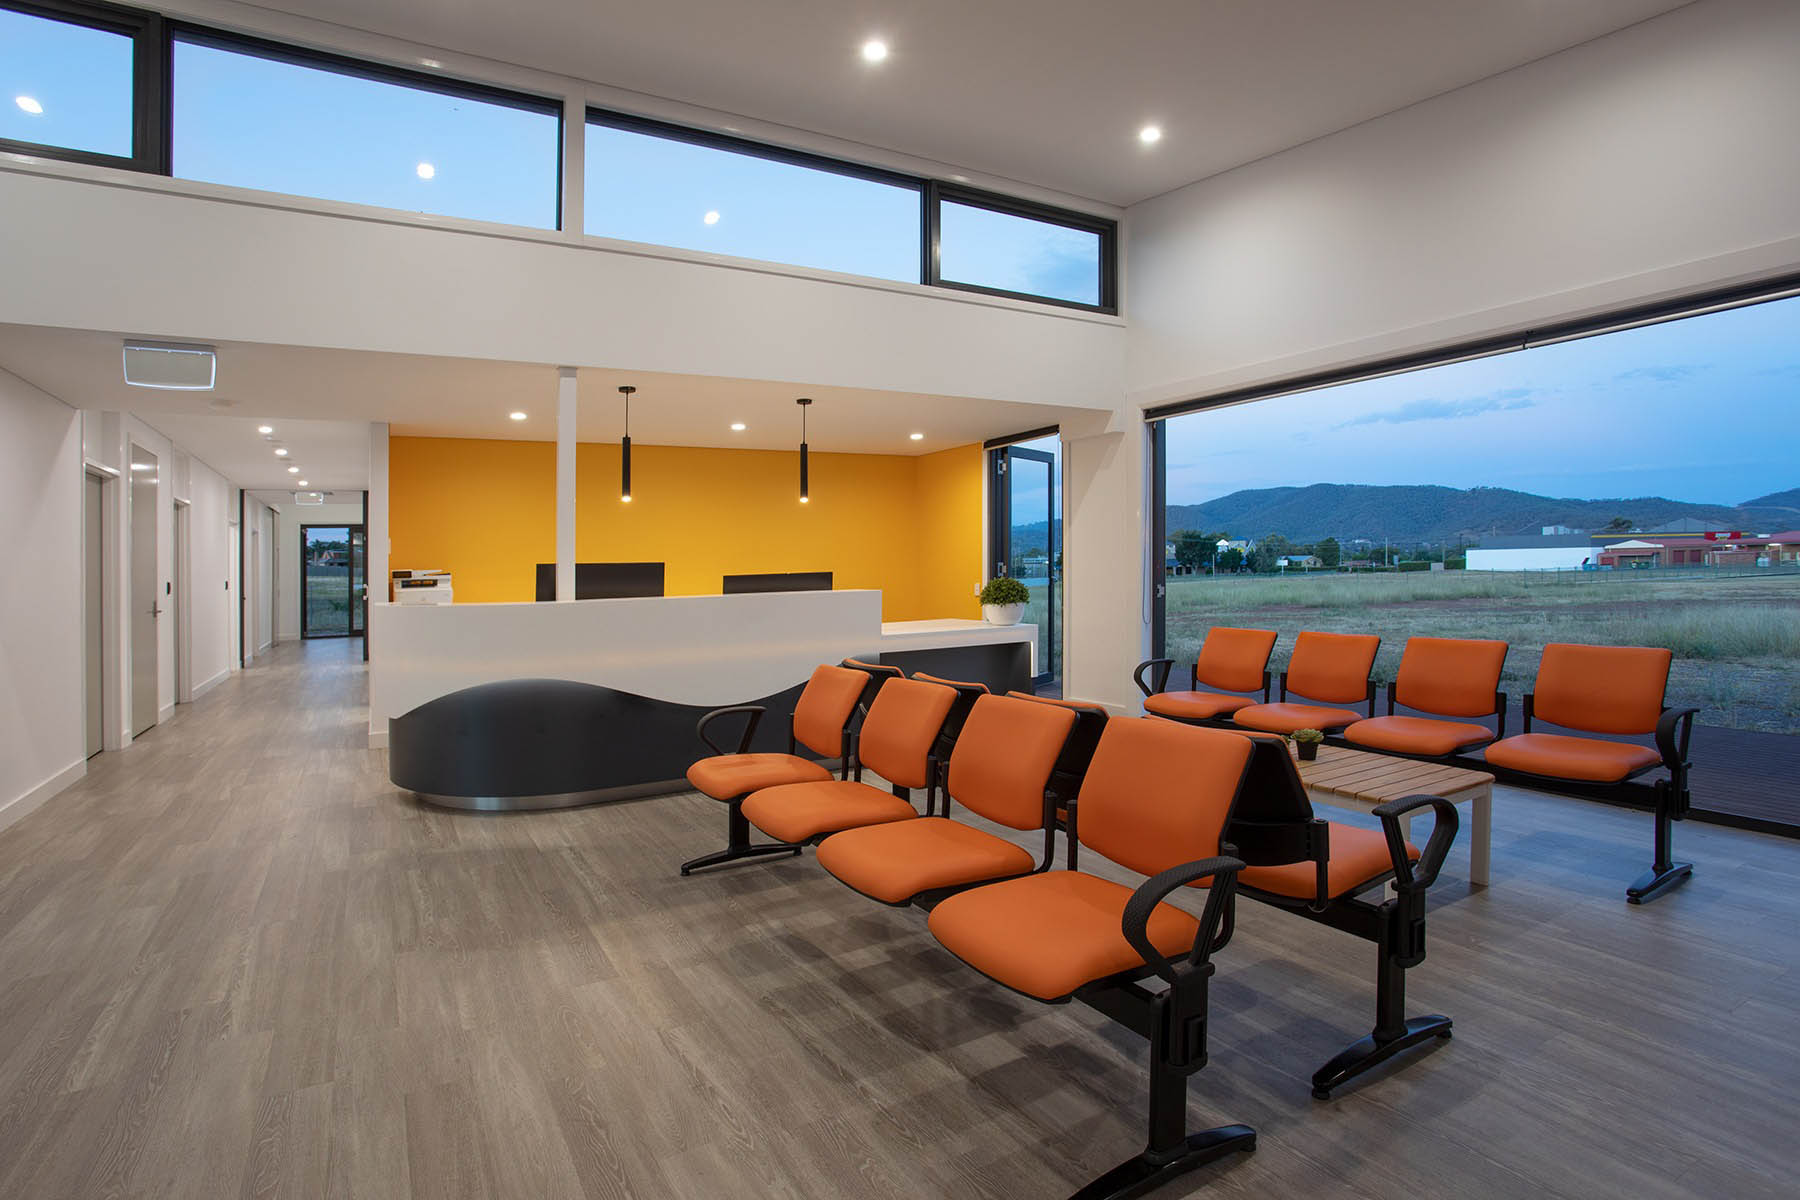 Modern, inviting waiting room and desk at a medical clinic by medical architecture and clinics by design by Space for Health